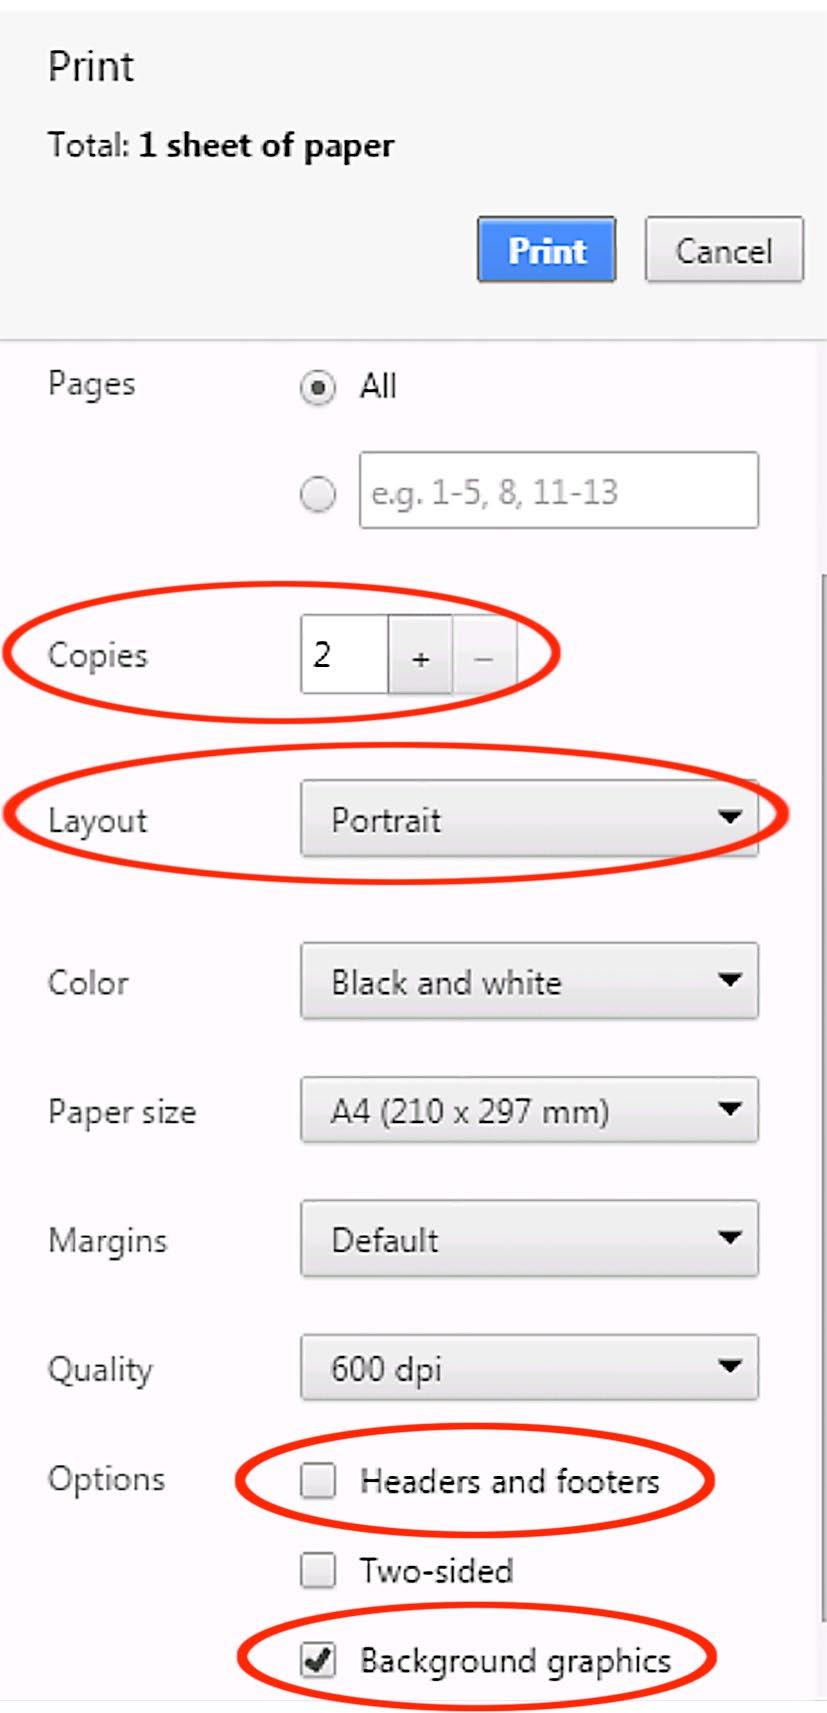 Step 4 > Ensure that the layout is in portrait. Uncheck the headers and footers box & check the background graphics box. Select 2 copies! Then select print.